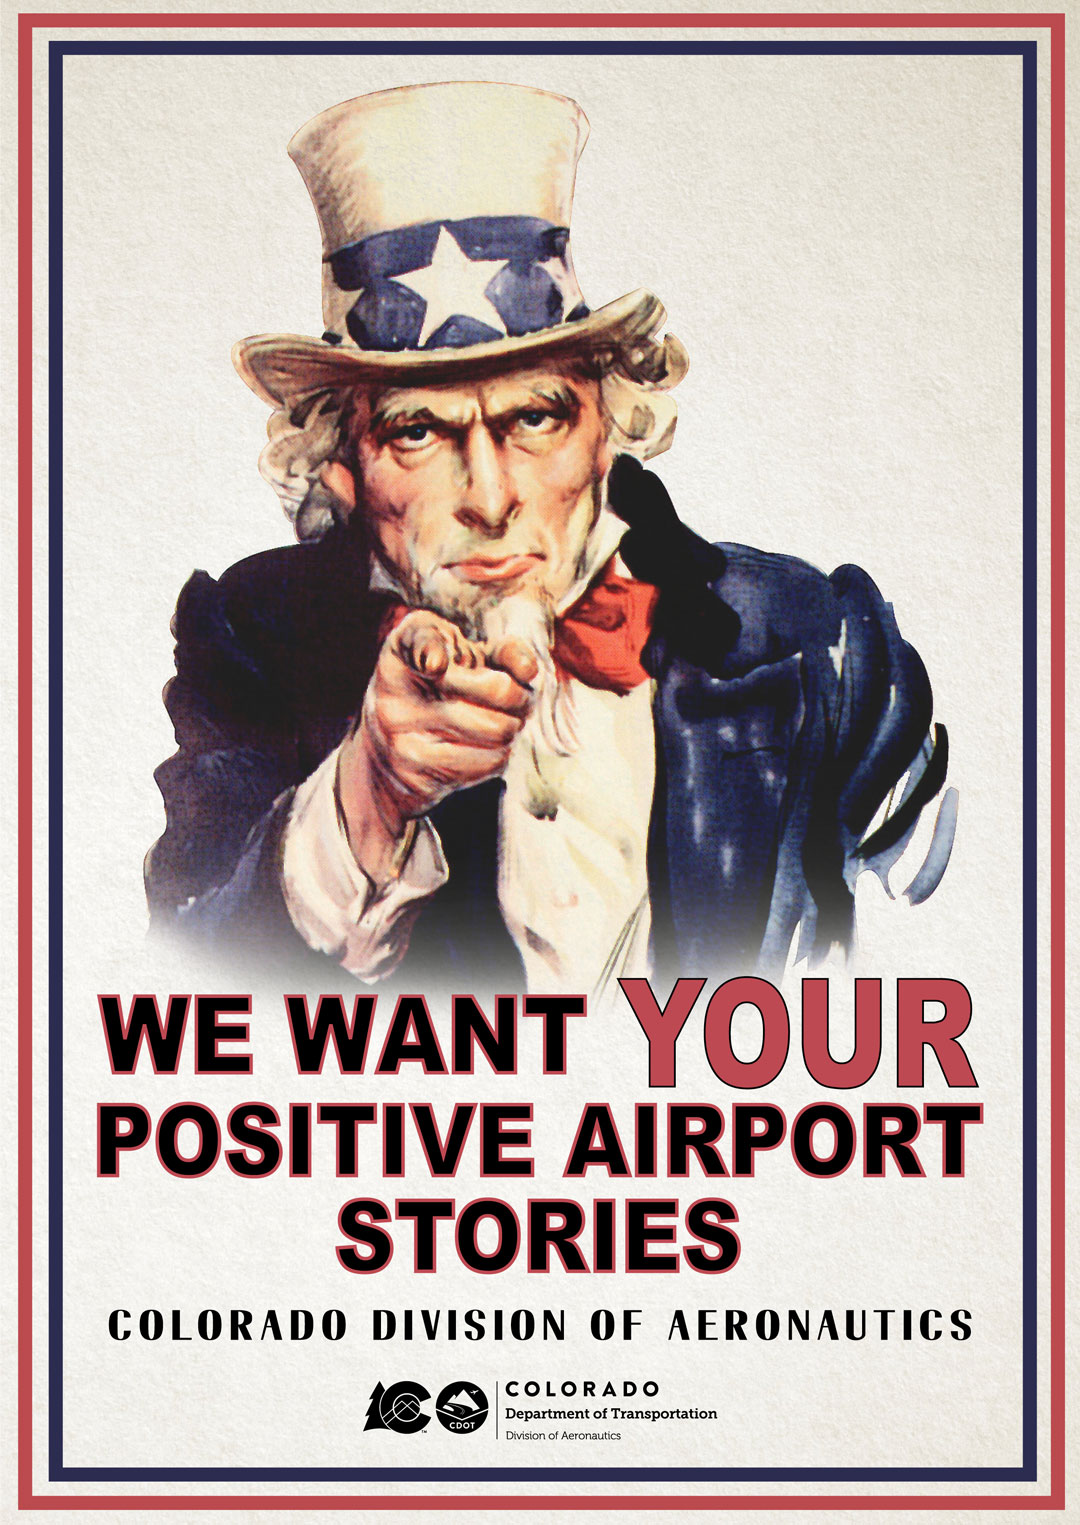 We Want Your Positive Airport Stories detail image